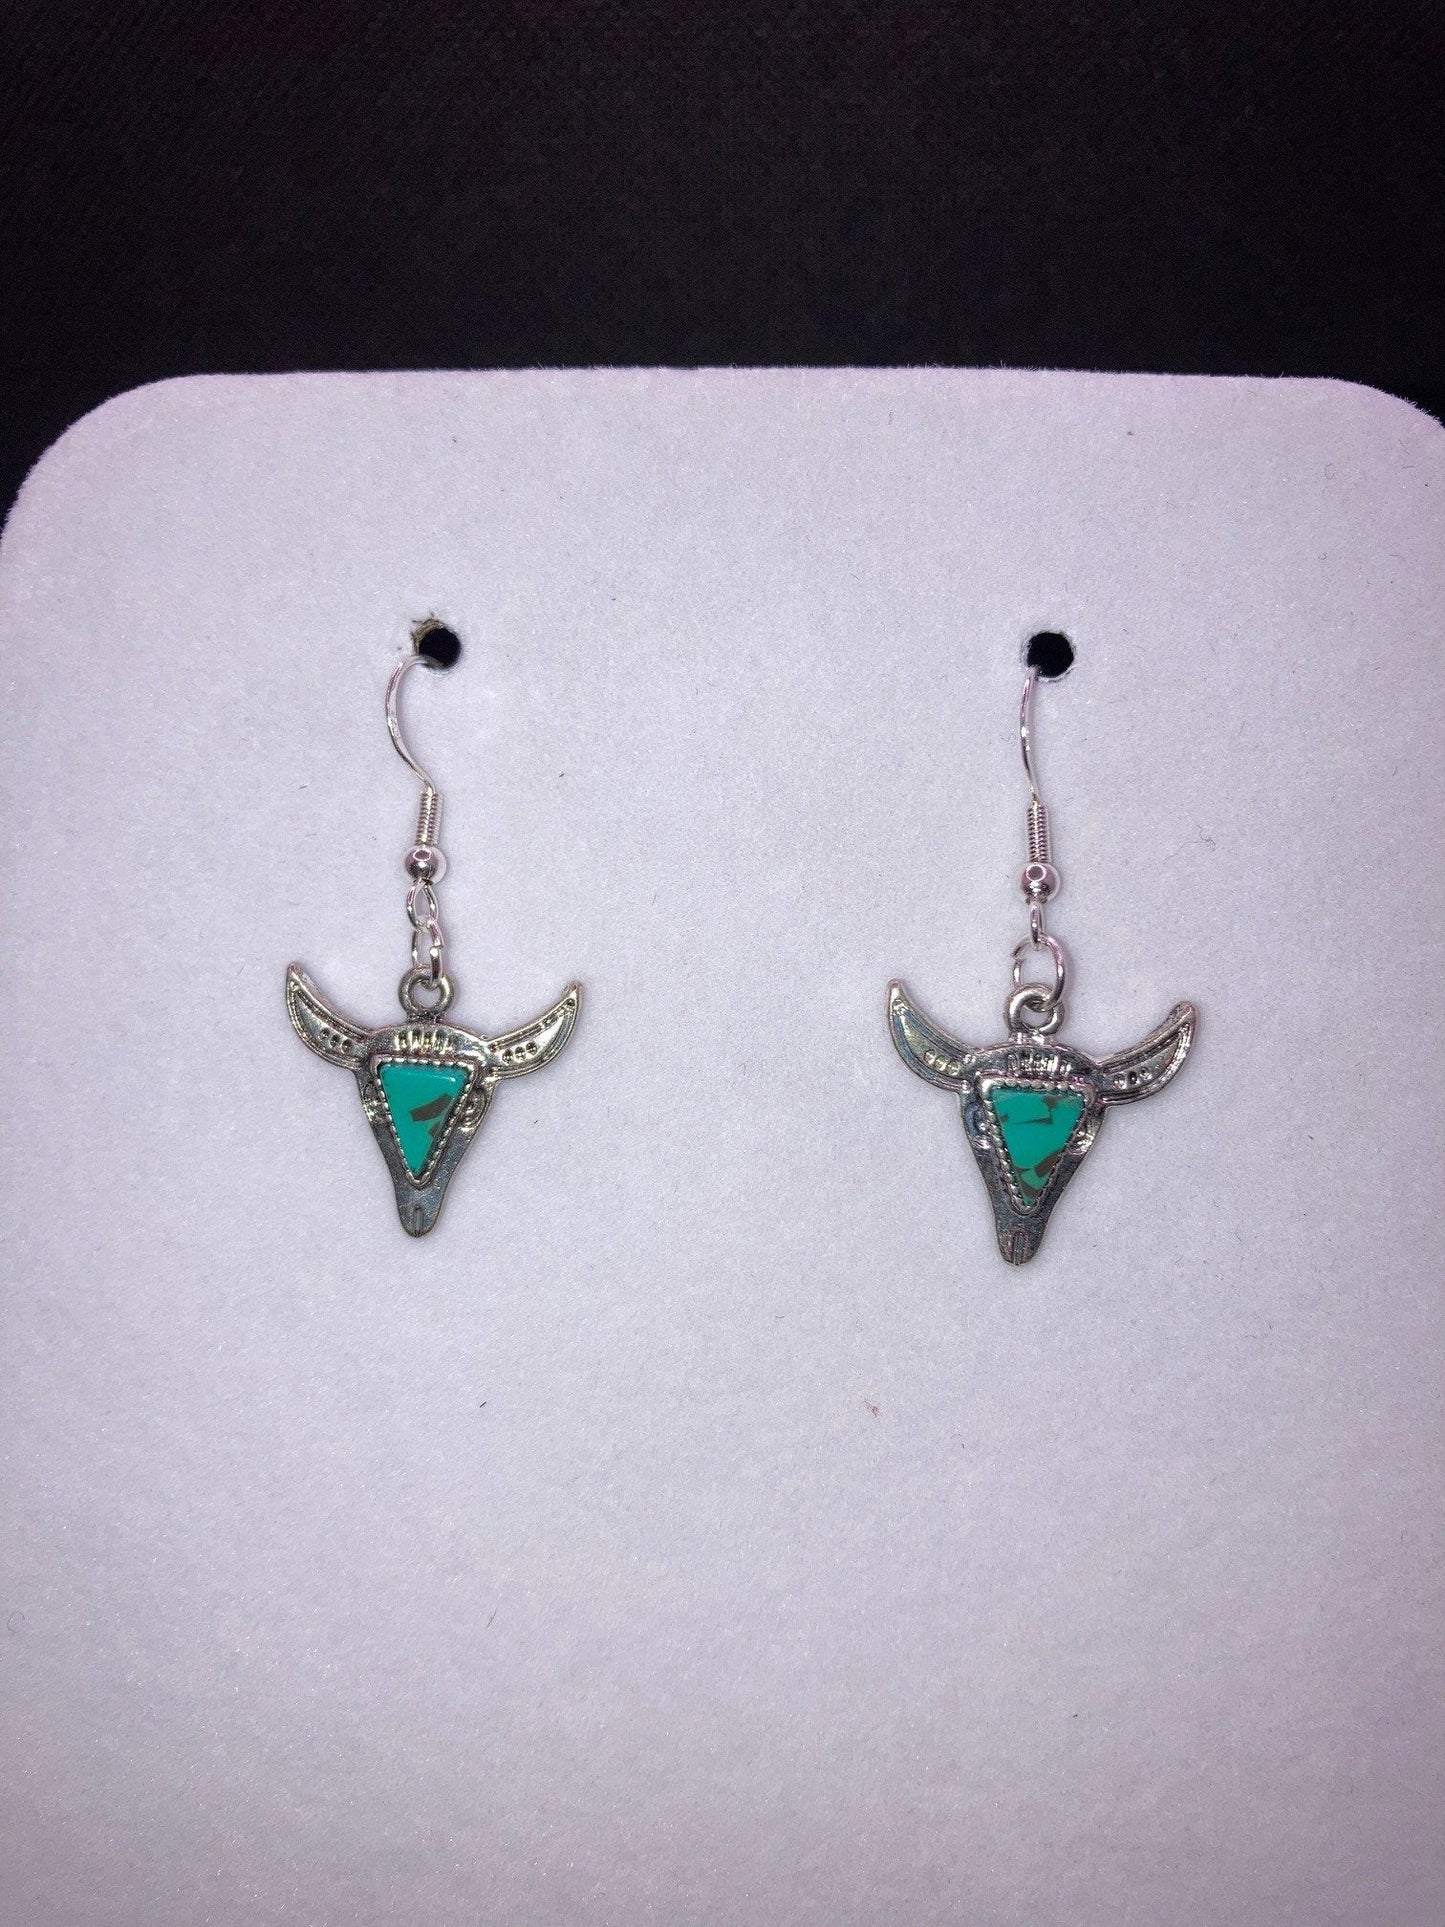 Western, Southwest, Country Style Silver Steer Earrings w Turquoise Simulated Stone Trim